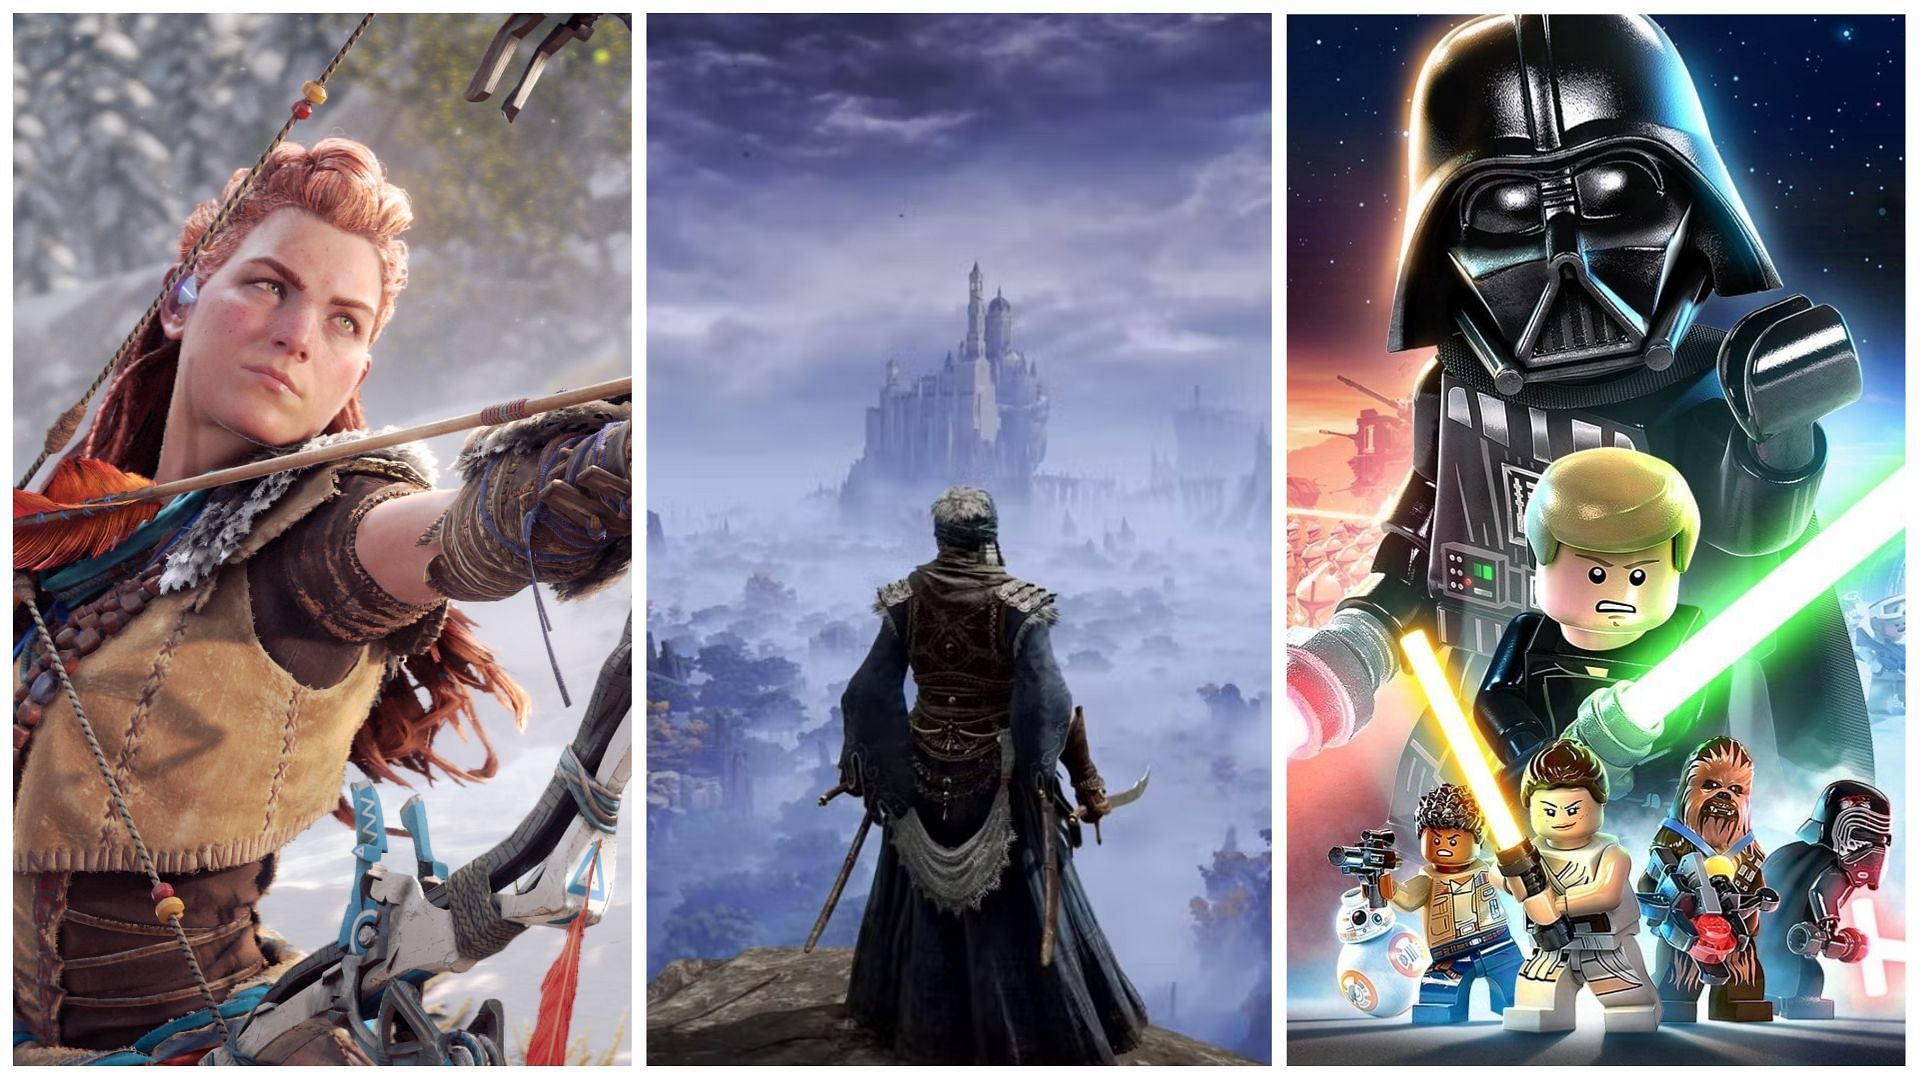 2022 has been an excellent year for video games (Images via Sony Interactive Entertainment, Bandai Namco, and Warner Bros)